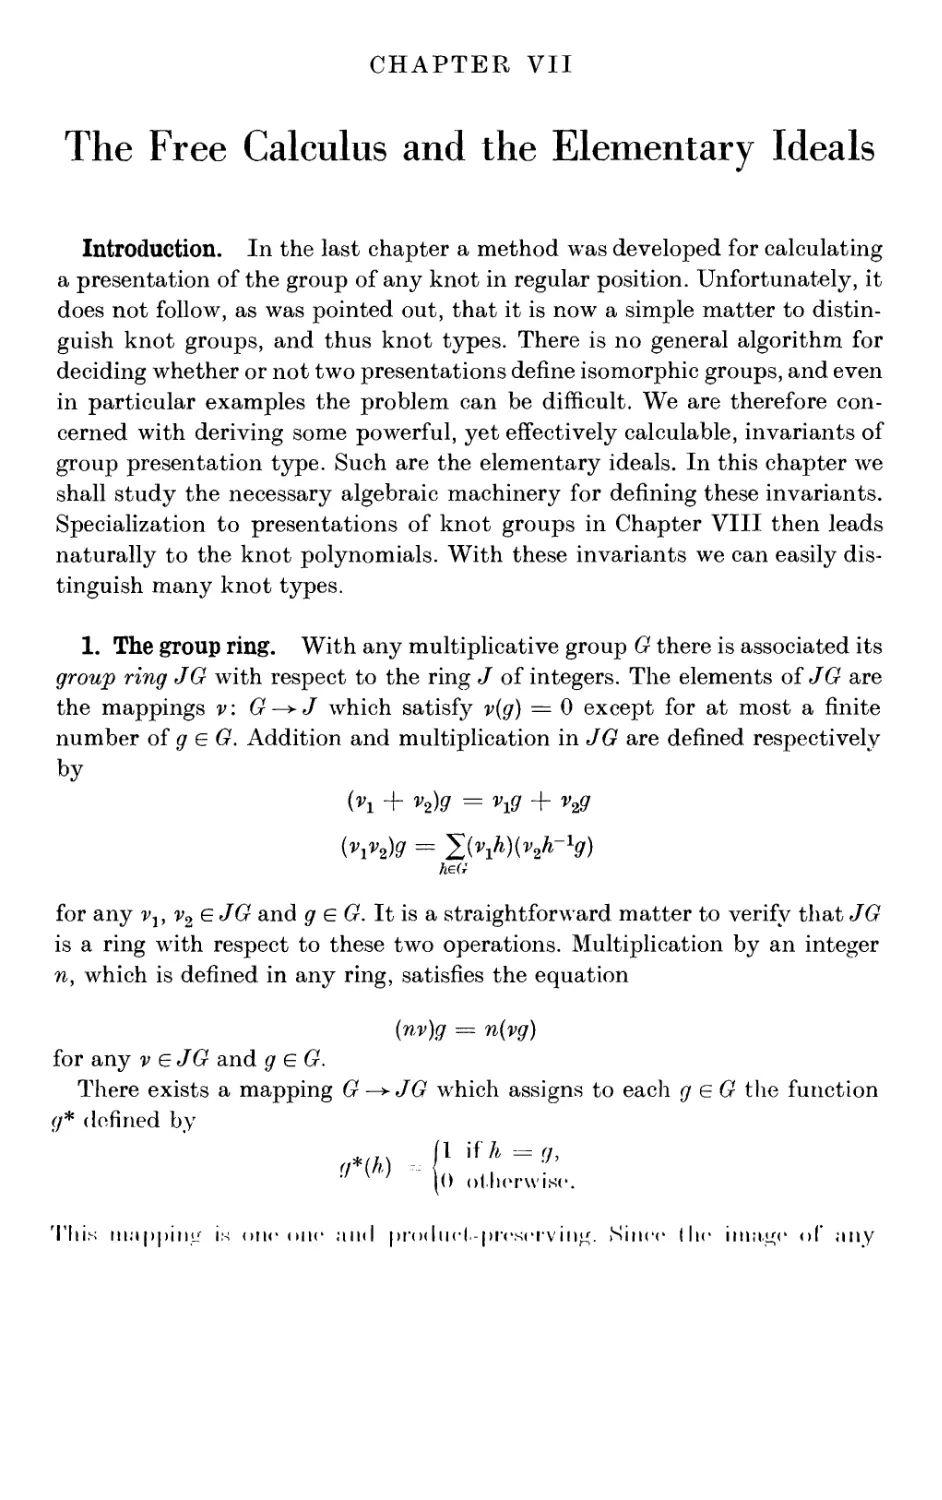 VII The Free Calculus and the Elementary Ideals
1. The group ring